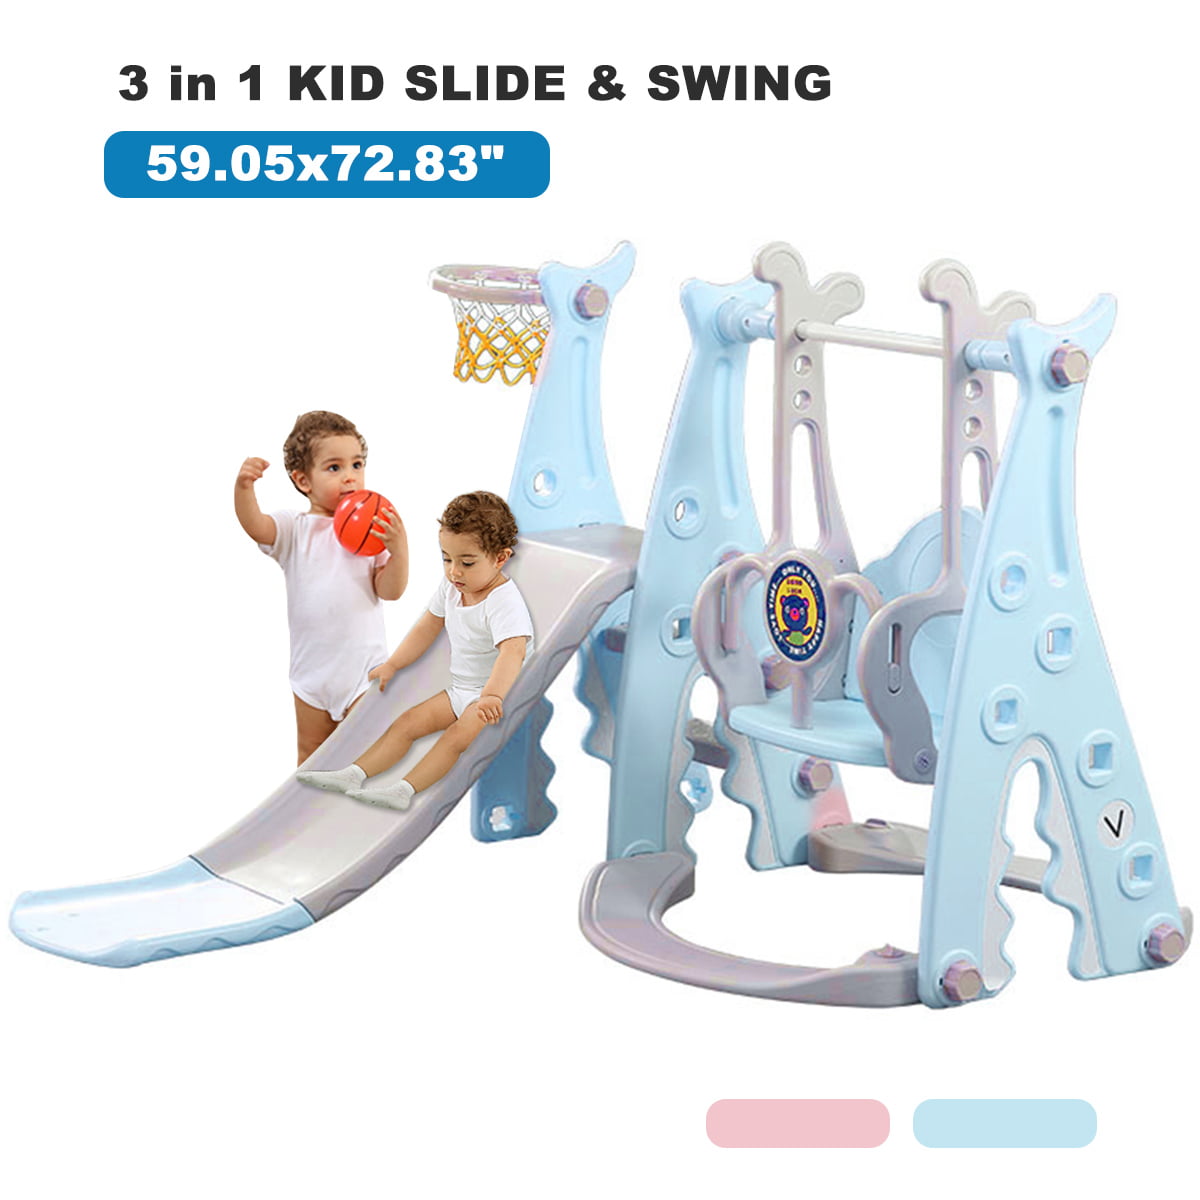 Details about   Toddler Slide and Swing Set 4 in 1 Basketball Hoop Indoor Outdoor Playground 